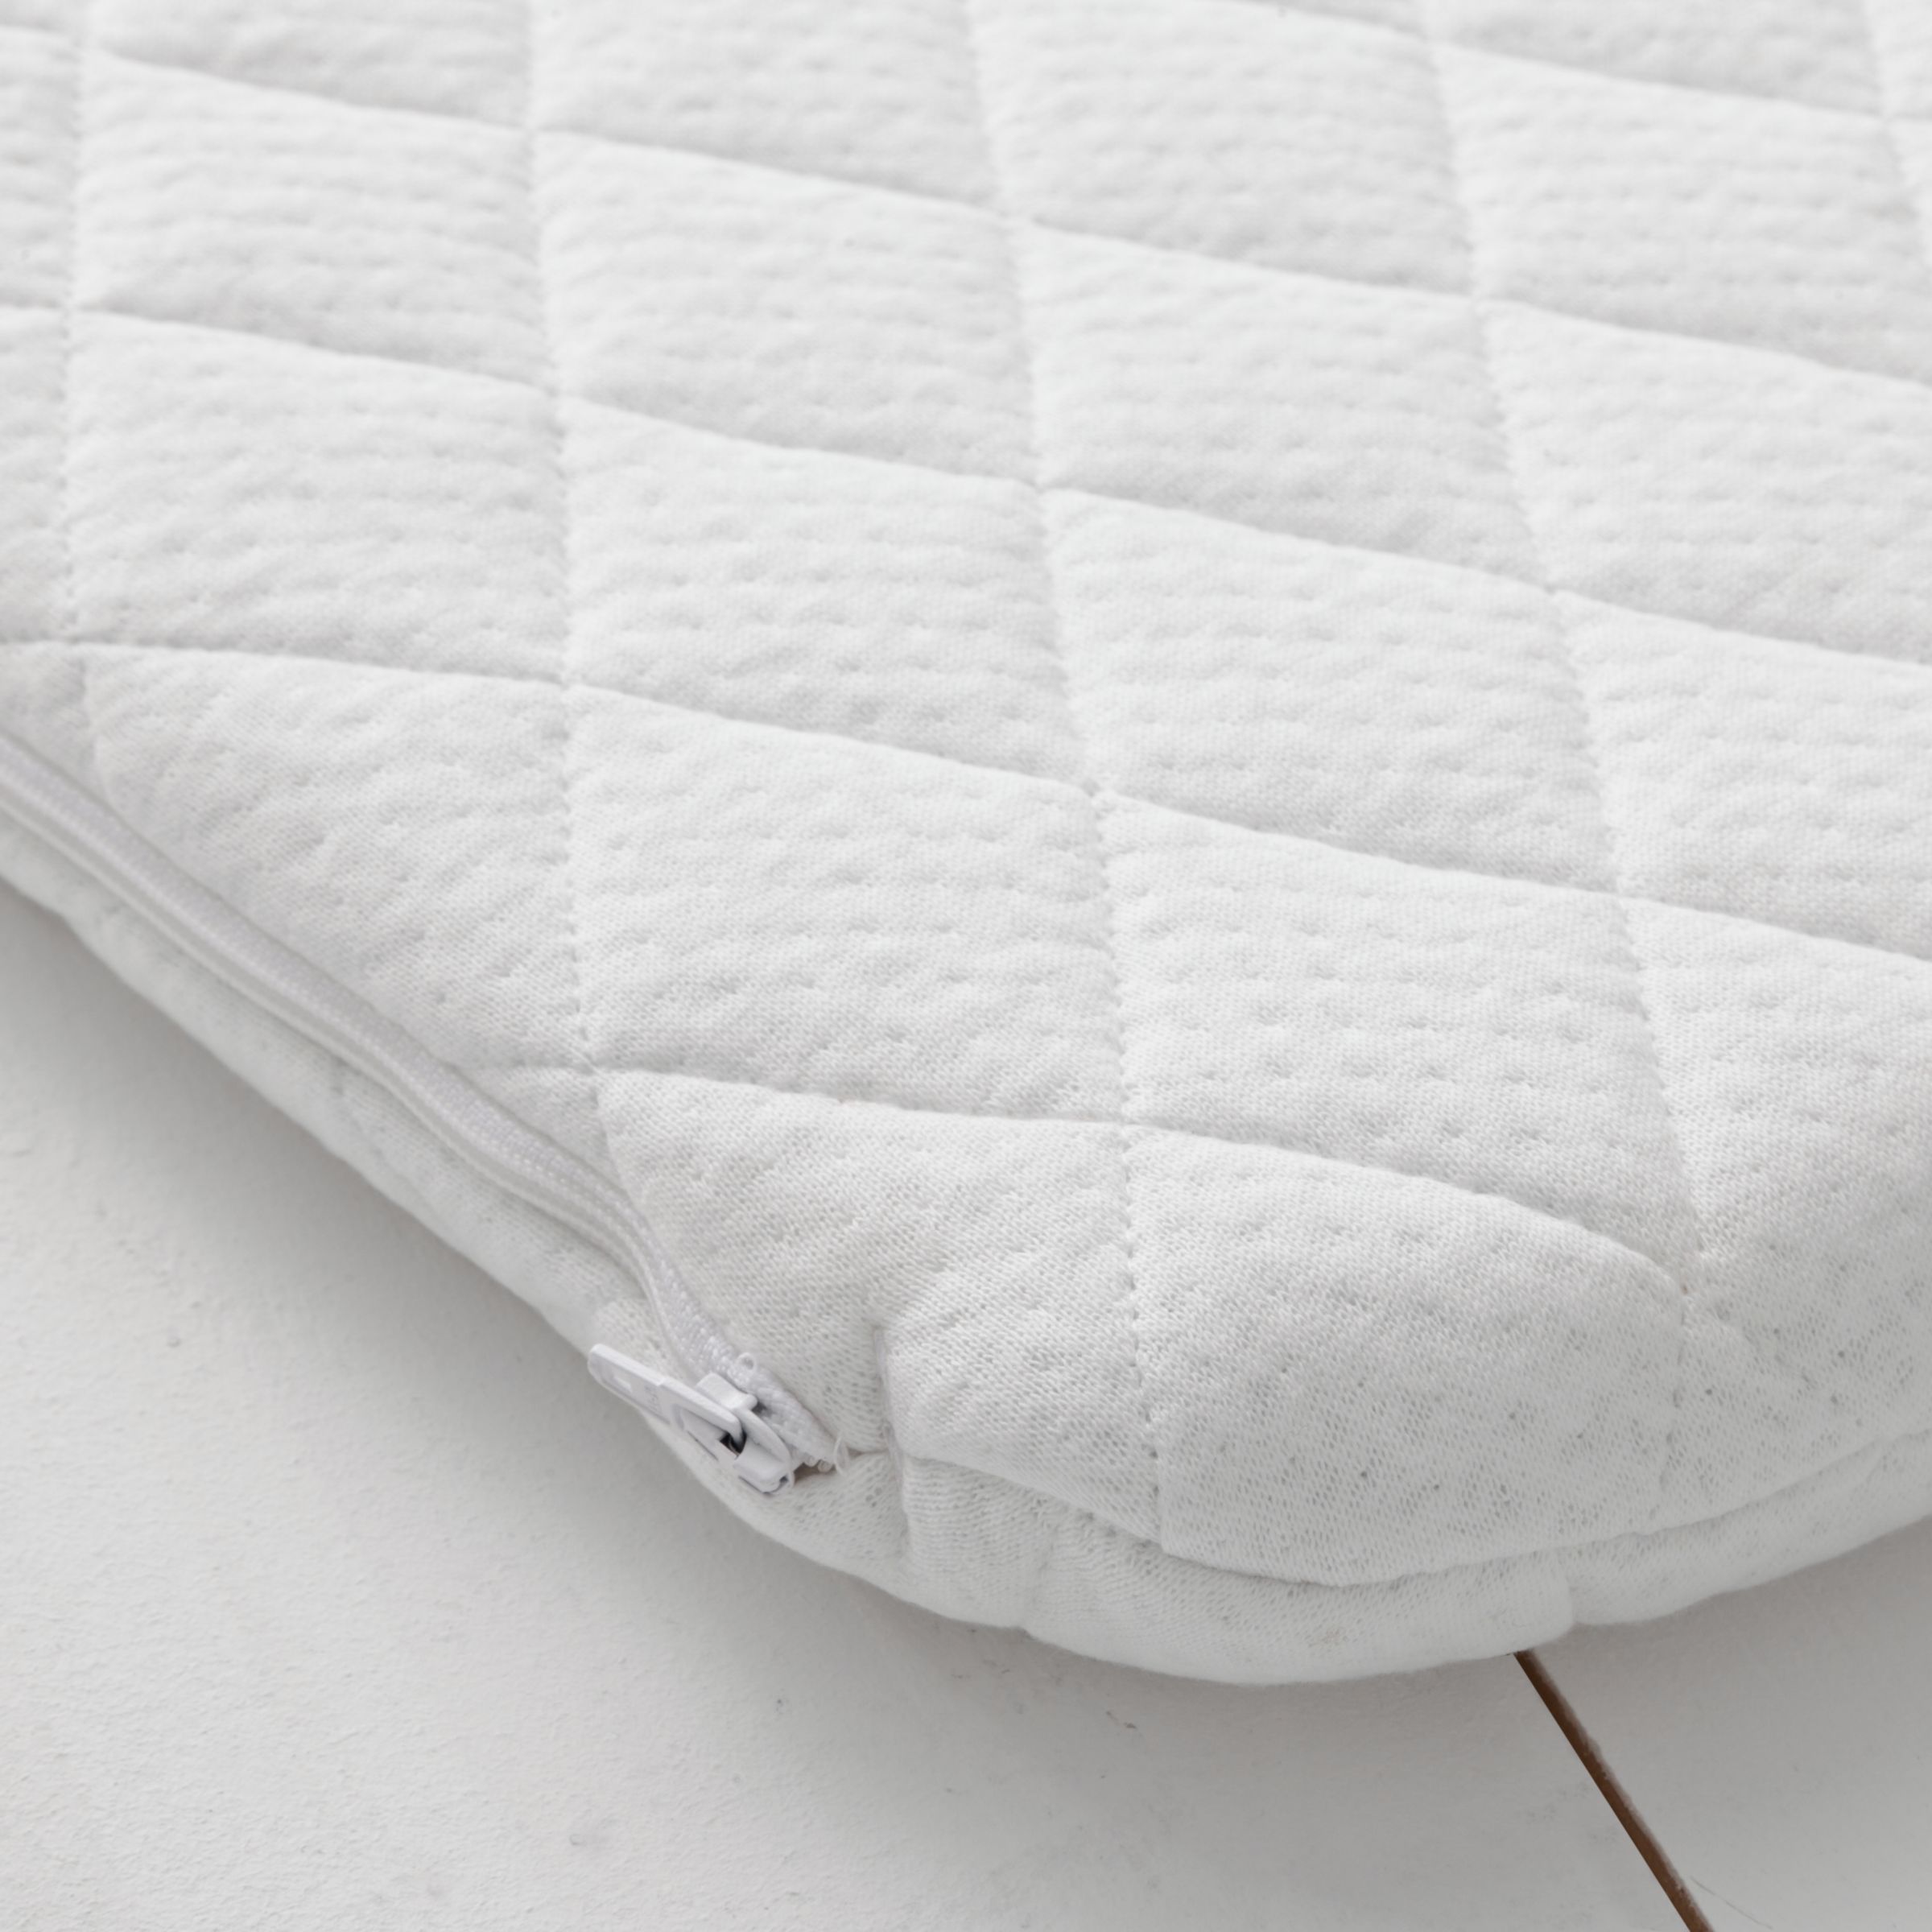 70 X 29 X 3.5 cm Quilted Breatheable Hypoallergenic Moses Pram Basket Mattress Oval Shaped Waterproof Mattress Size